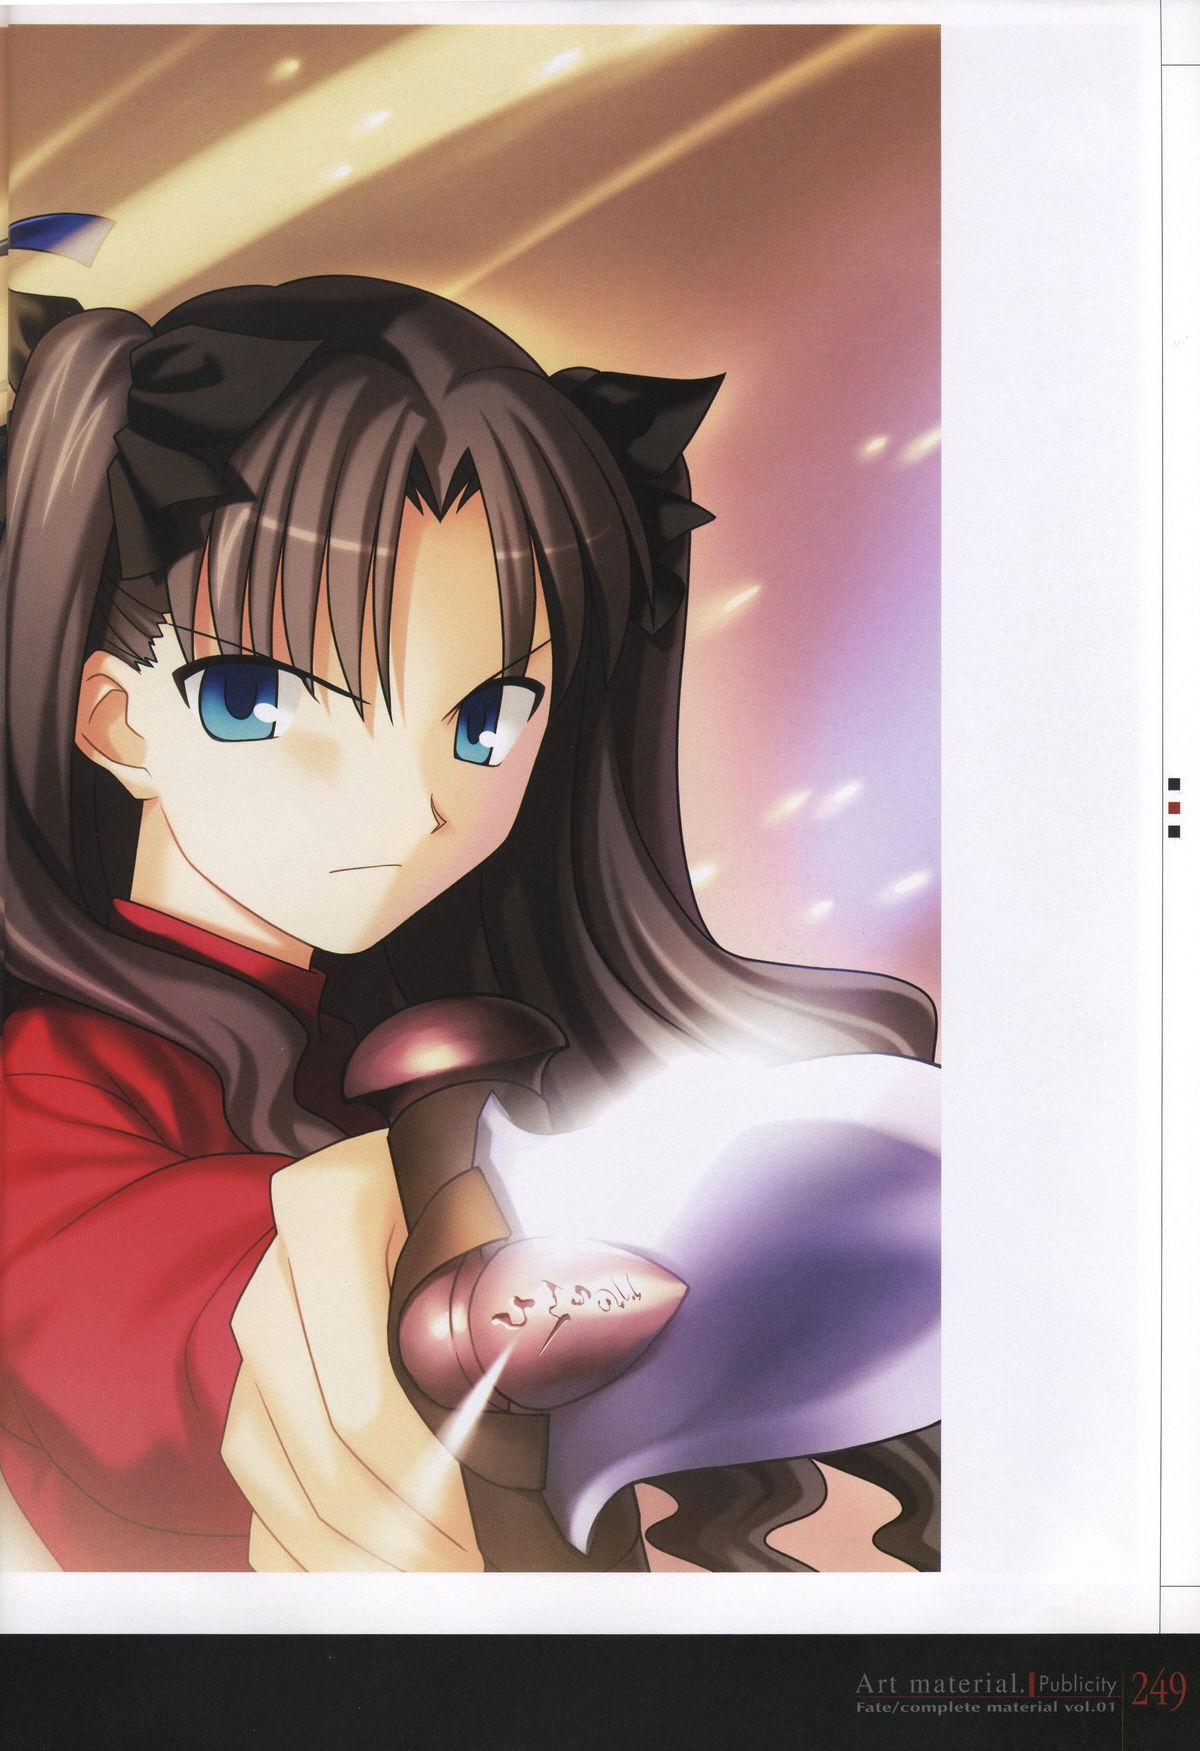 Fate/complete material I - Art material. 253